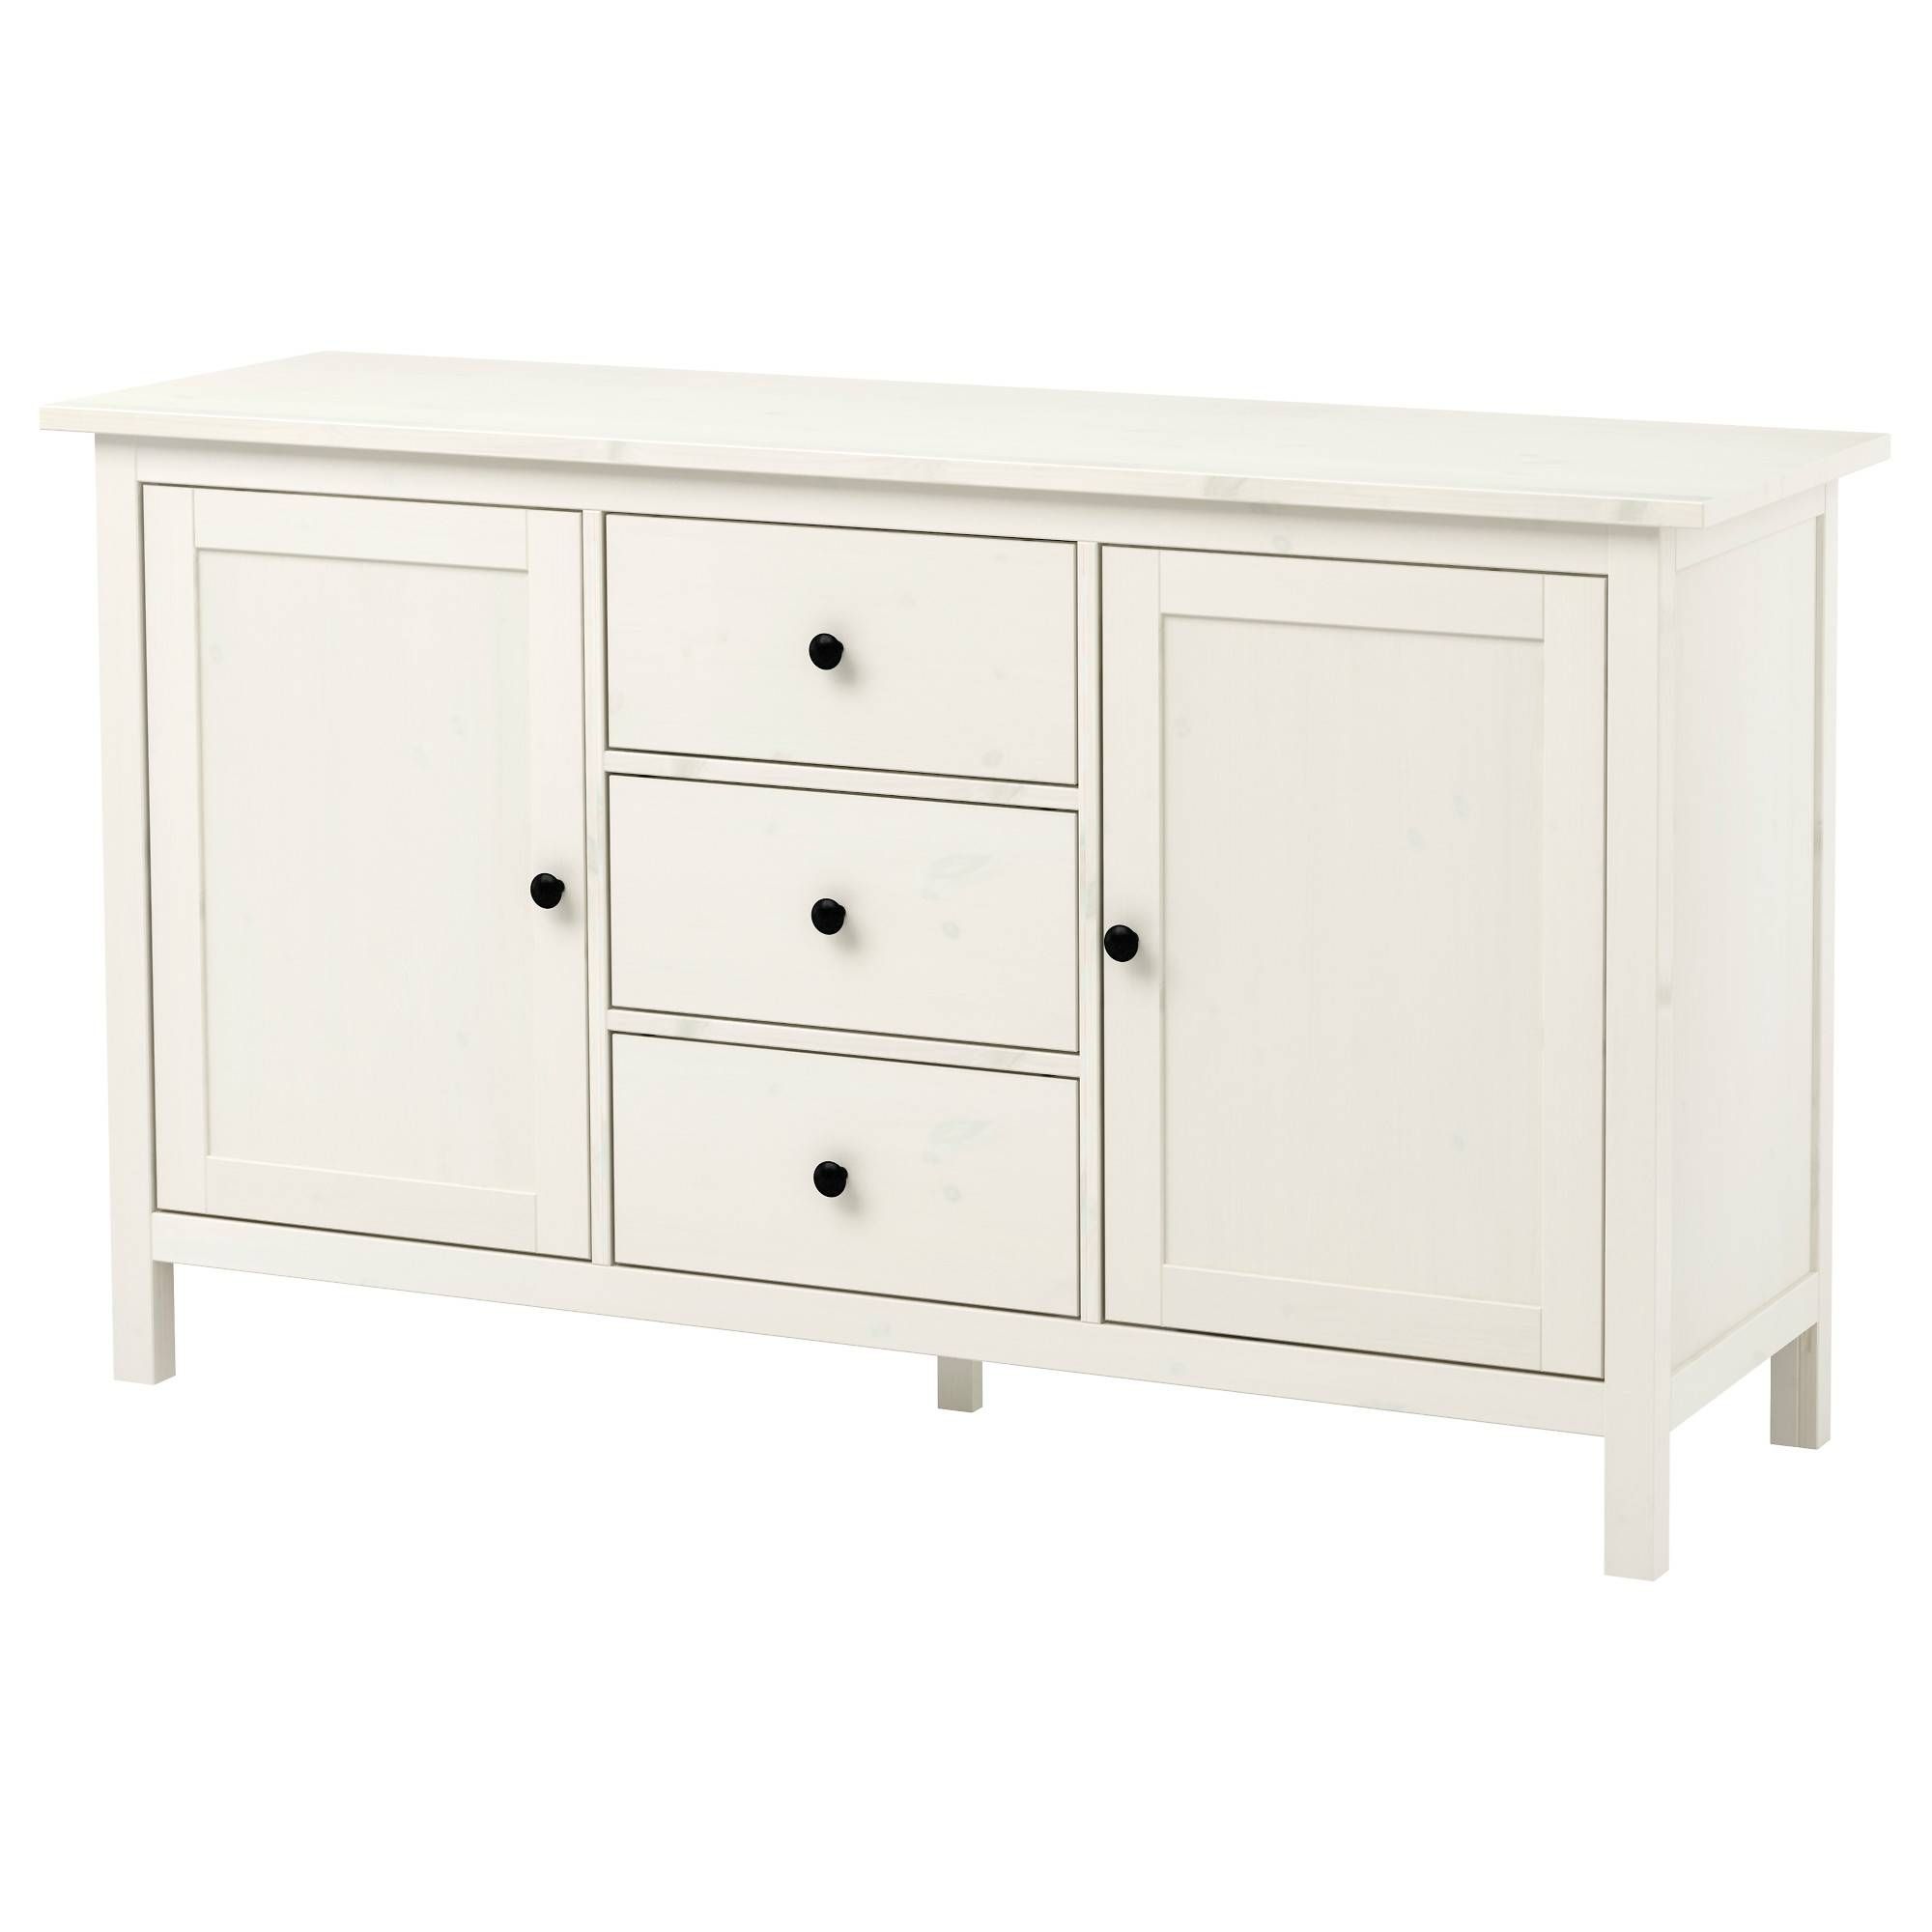 Hemnes Sideboard – White Stain – Ikea For Most Recent Tall Narrow Sideboards (View 2 of 15)